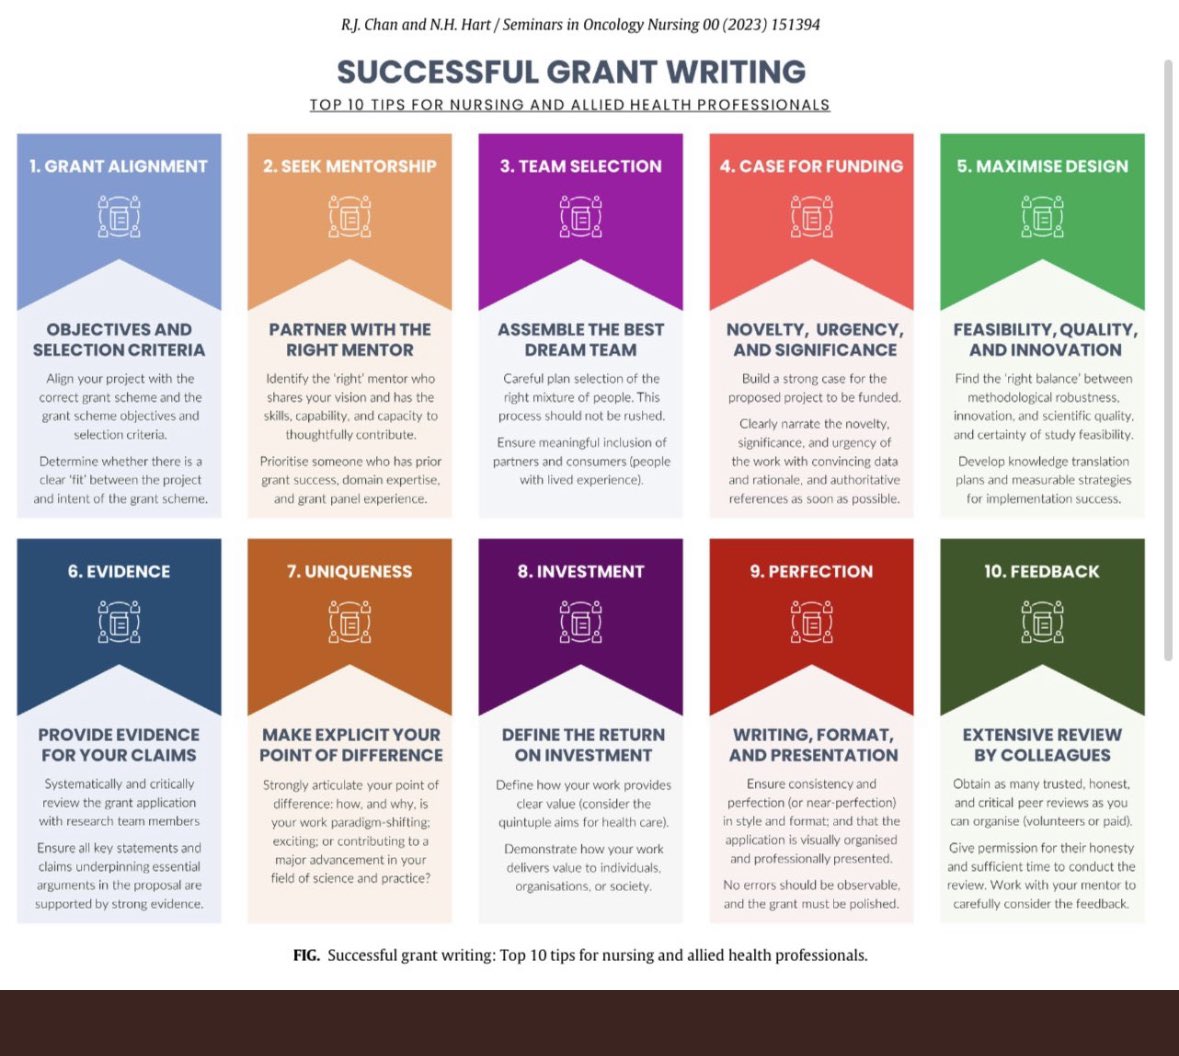 Great workshop by @rayychan on grant writing! Favourite point was: evidence, evidence, evidence! Check out the full paper at authors.elsevier.com/a/1gYxq2gMQS2C… @survonc @FlindersCFI